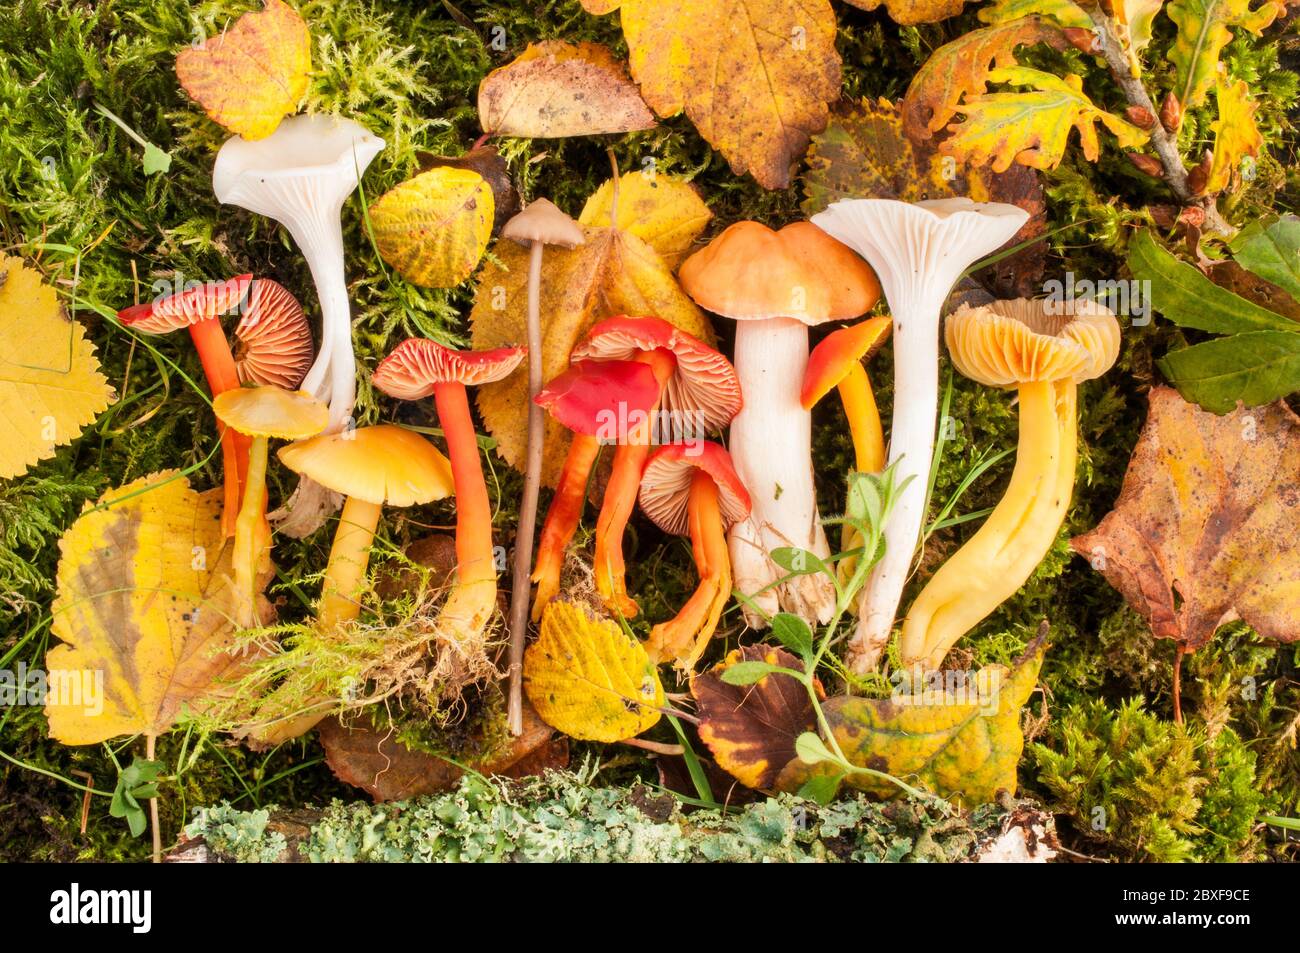 Waxcap fungi, field fungi uk. These fungi grown in meadows and are often barely perceptible beneath the grass Stock Photo